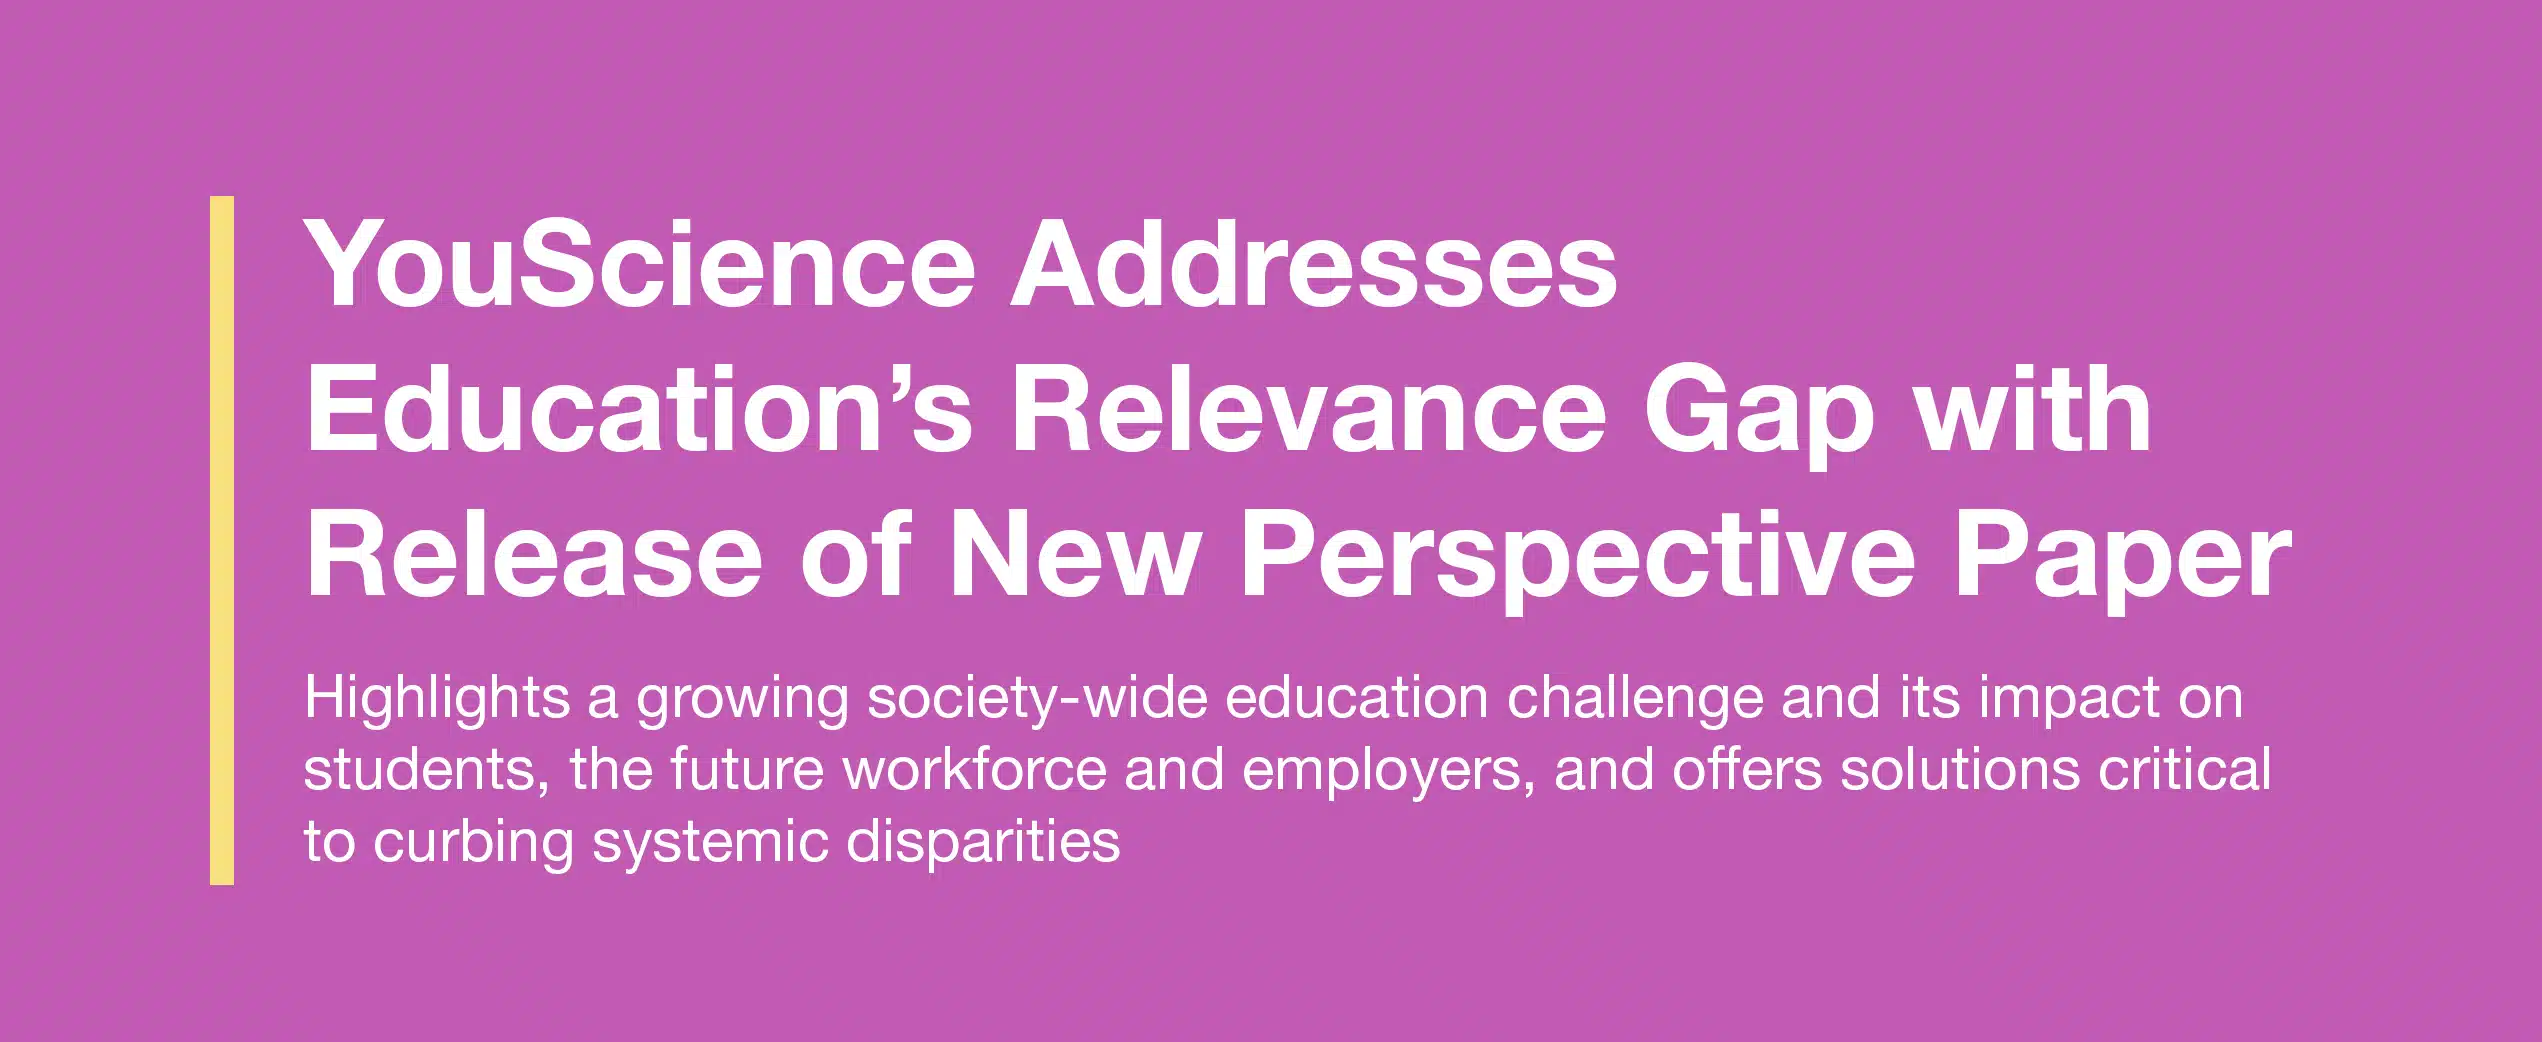 YouScience Addresses Education’s Relevance Gap with Release of New Perspective Paper